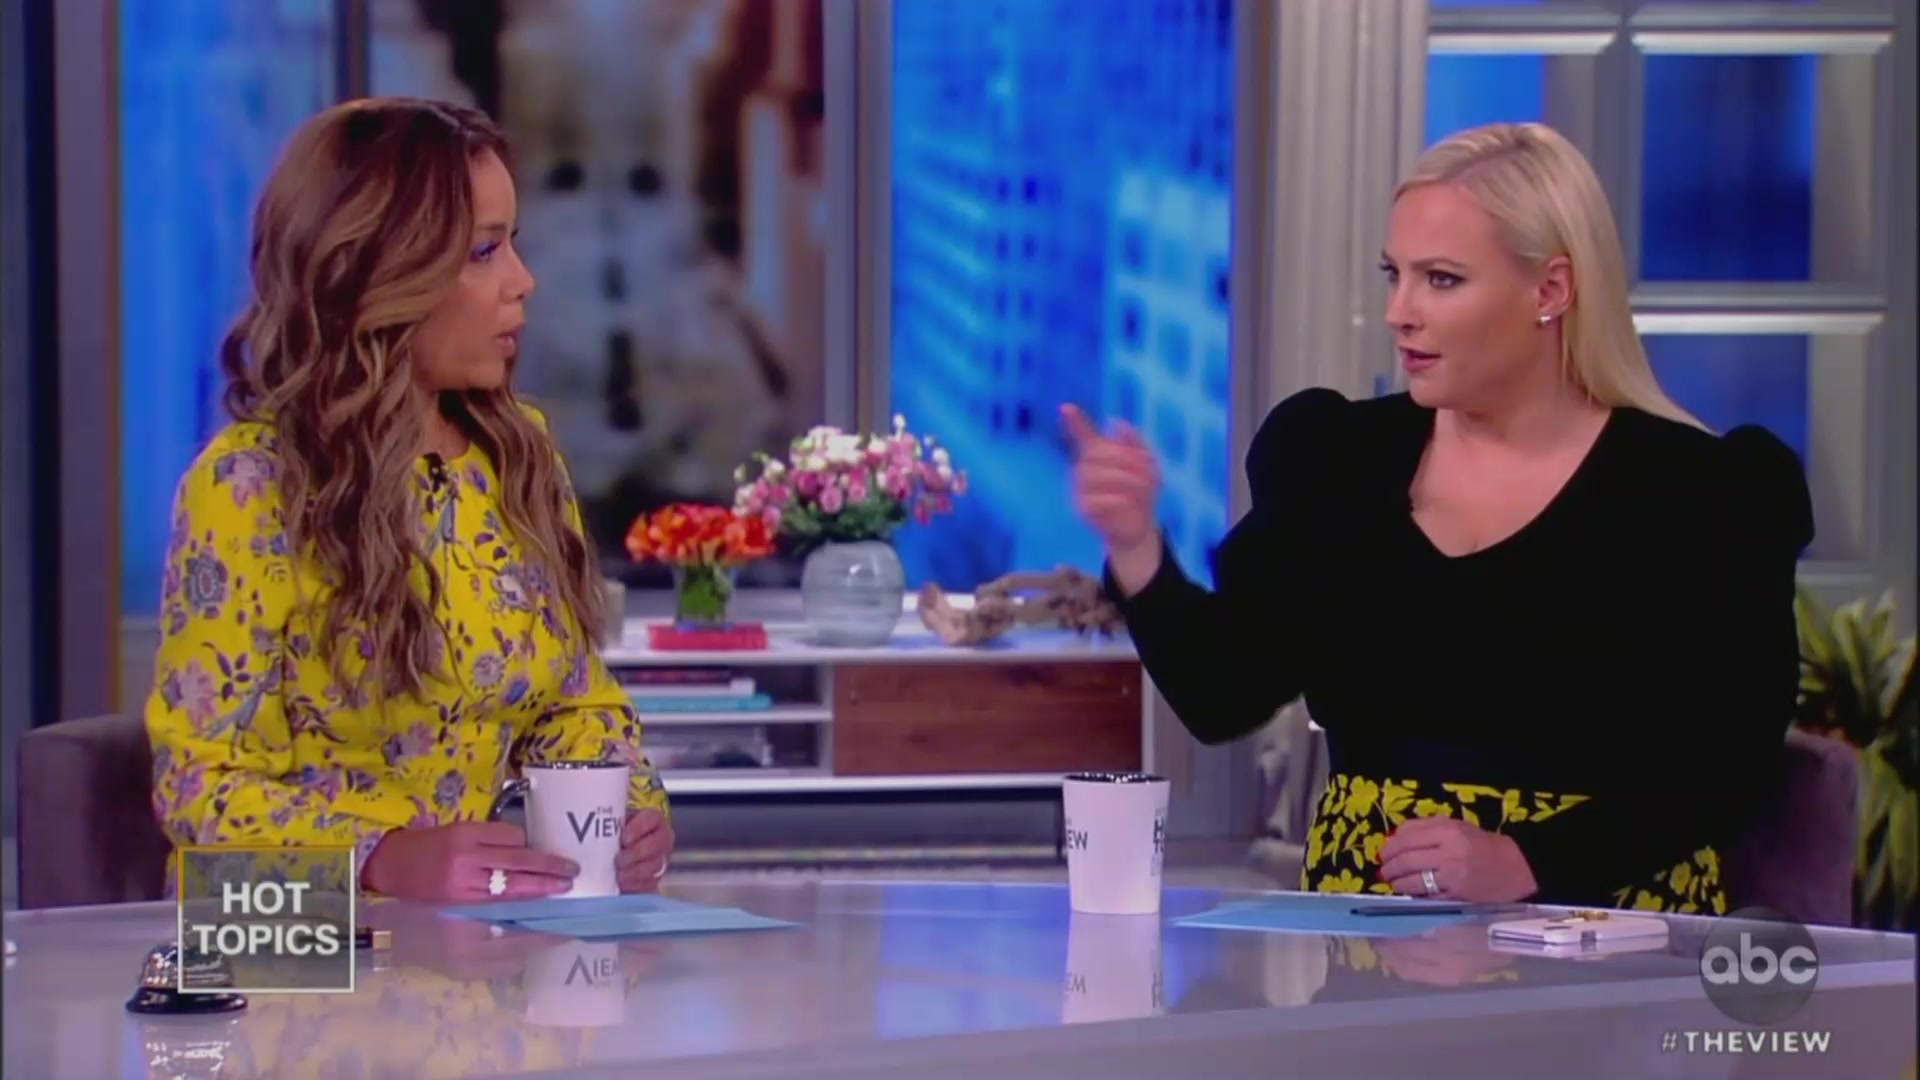 Meghan McCain Snaps at ‘View’ Colleague: ‘You Don’t Need to Look at Me That Way’